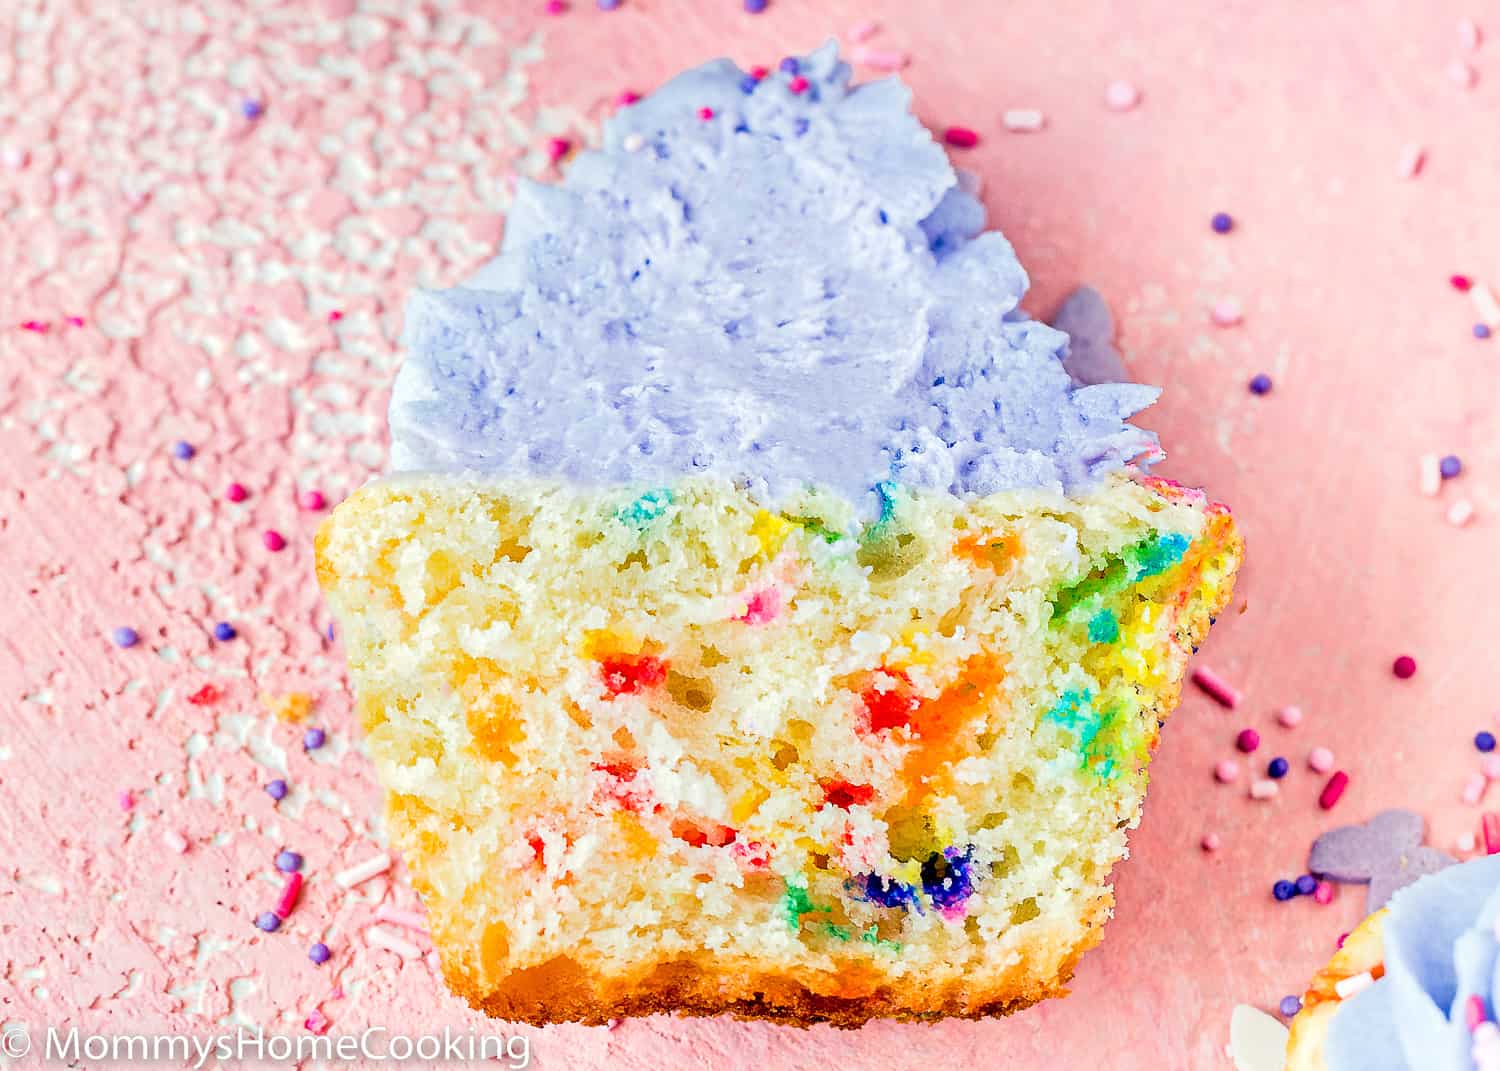 An Eggless Funfetti Cupcake cut in half showing its fluffy texture inside.